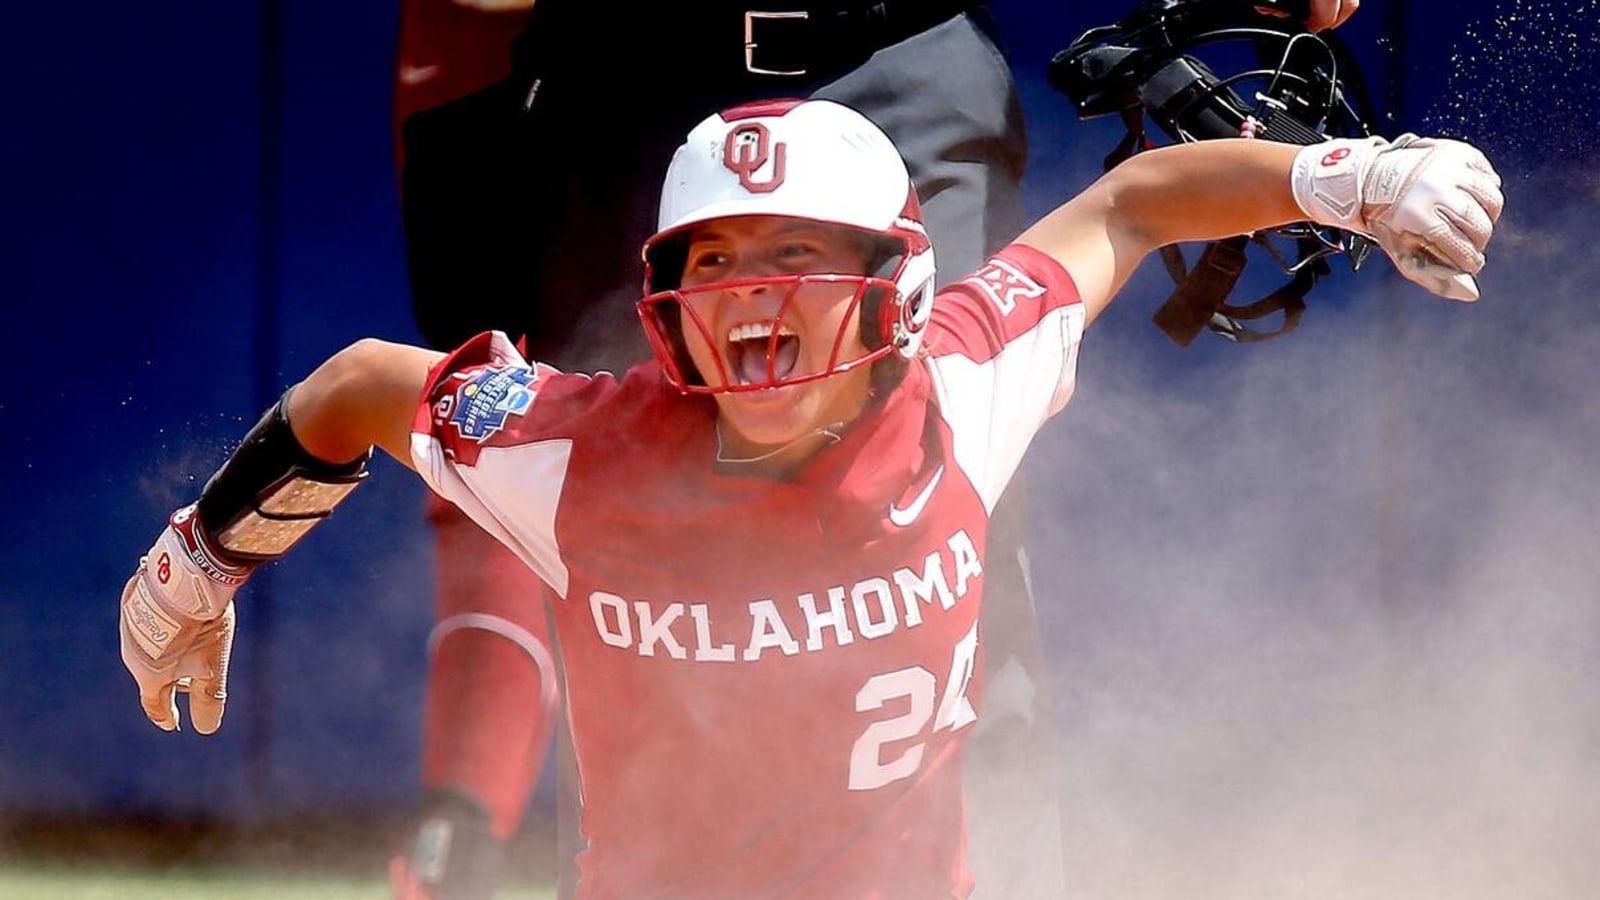 Oklahoma, Texas to meet in Women's College World Series Finals